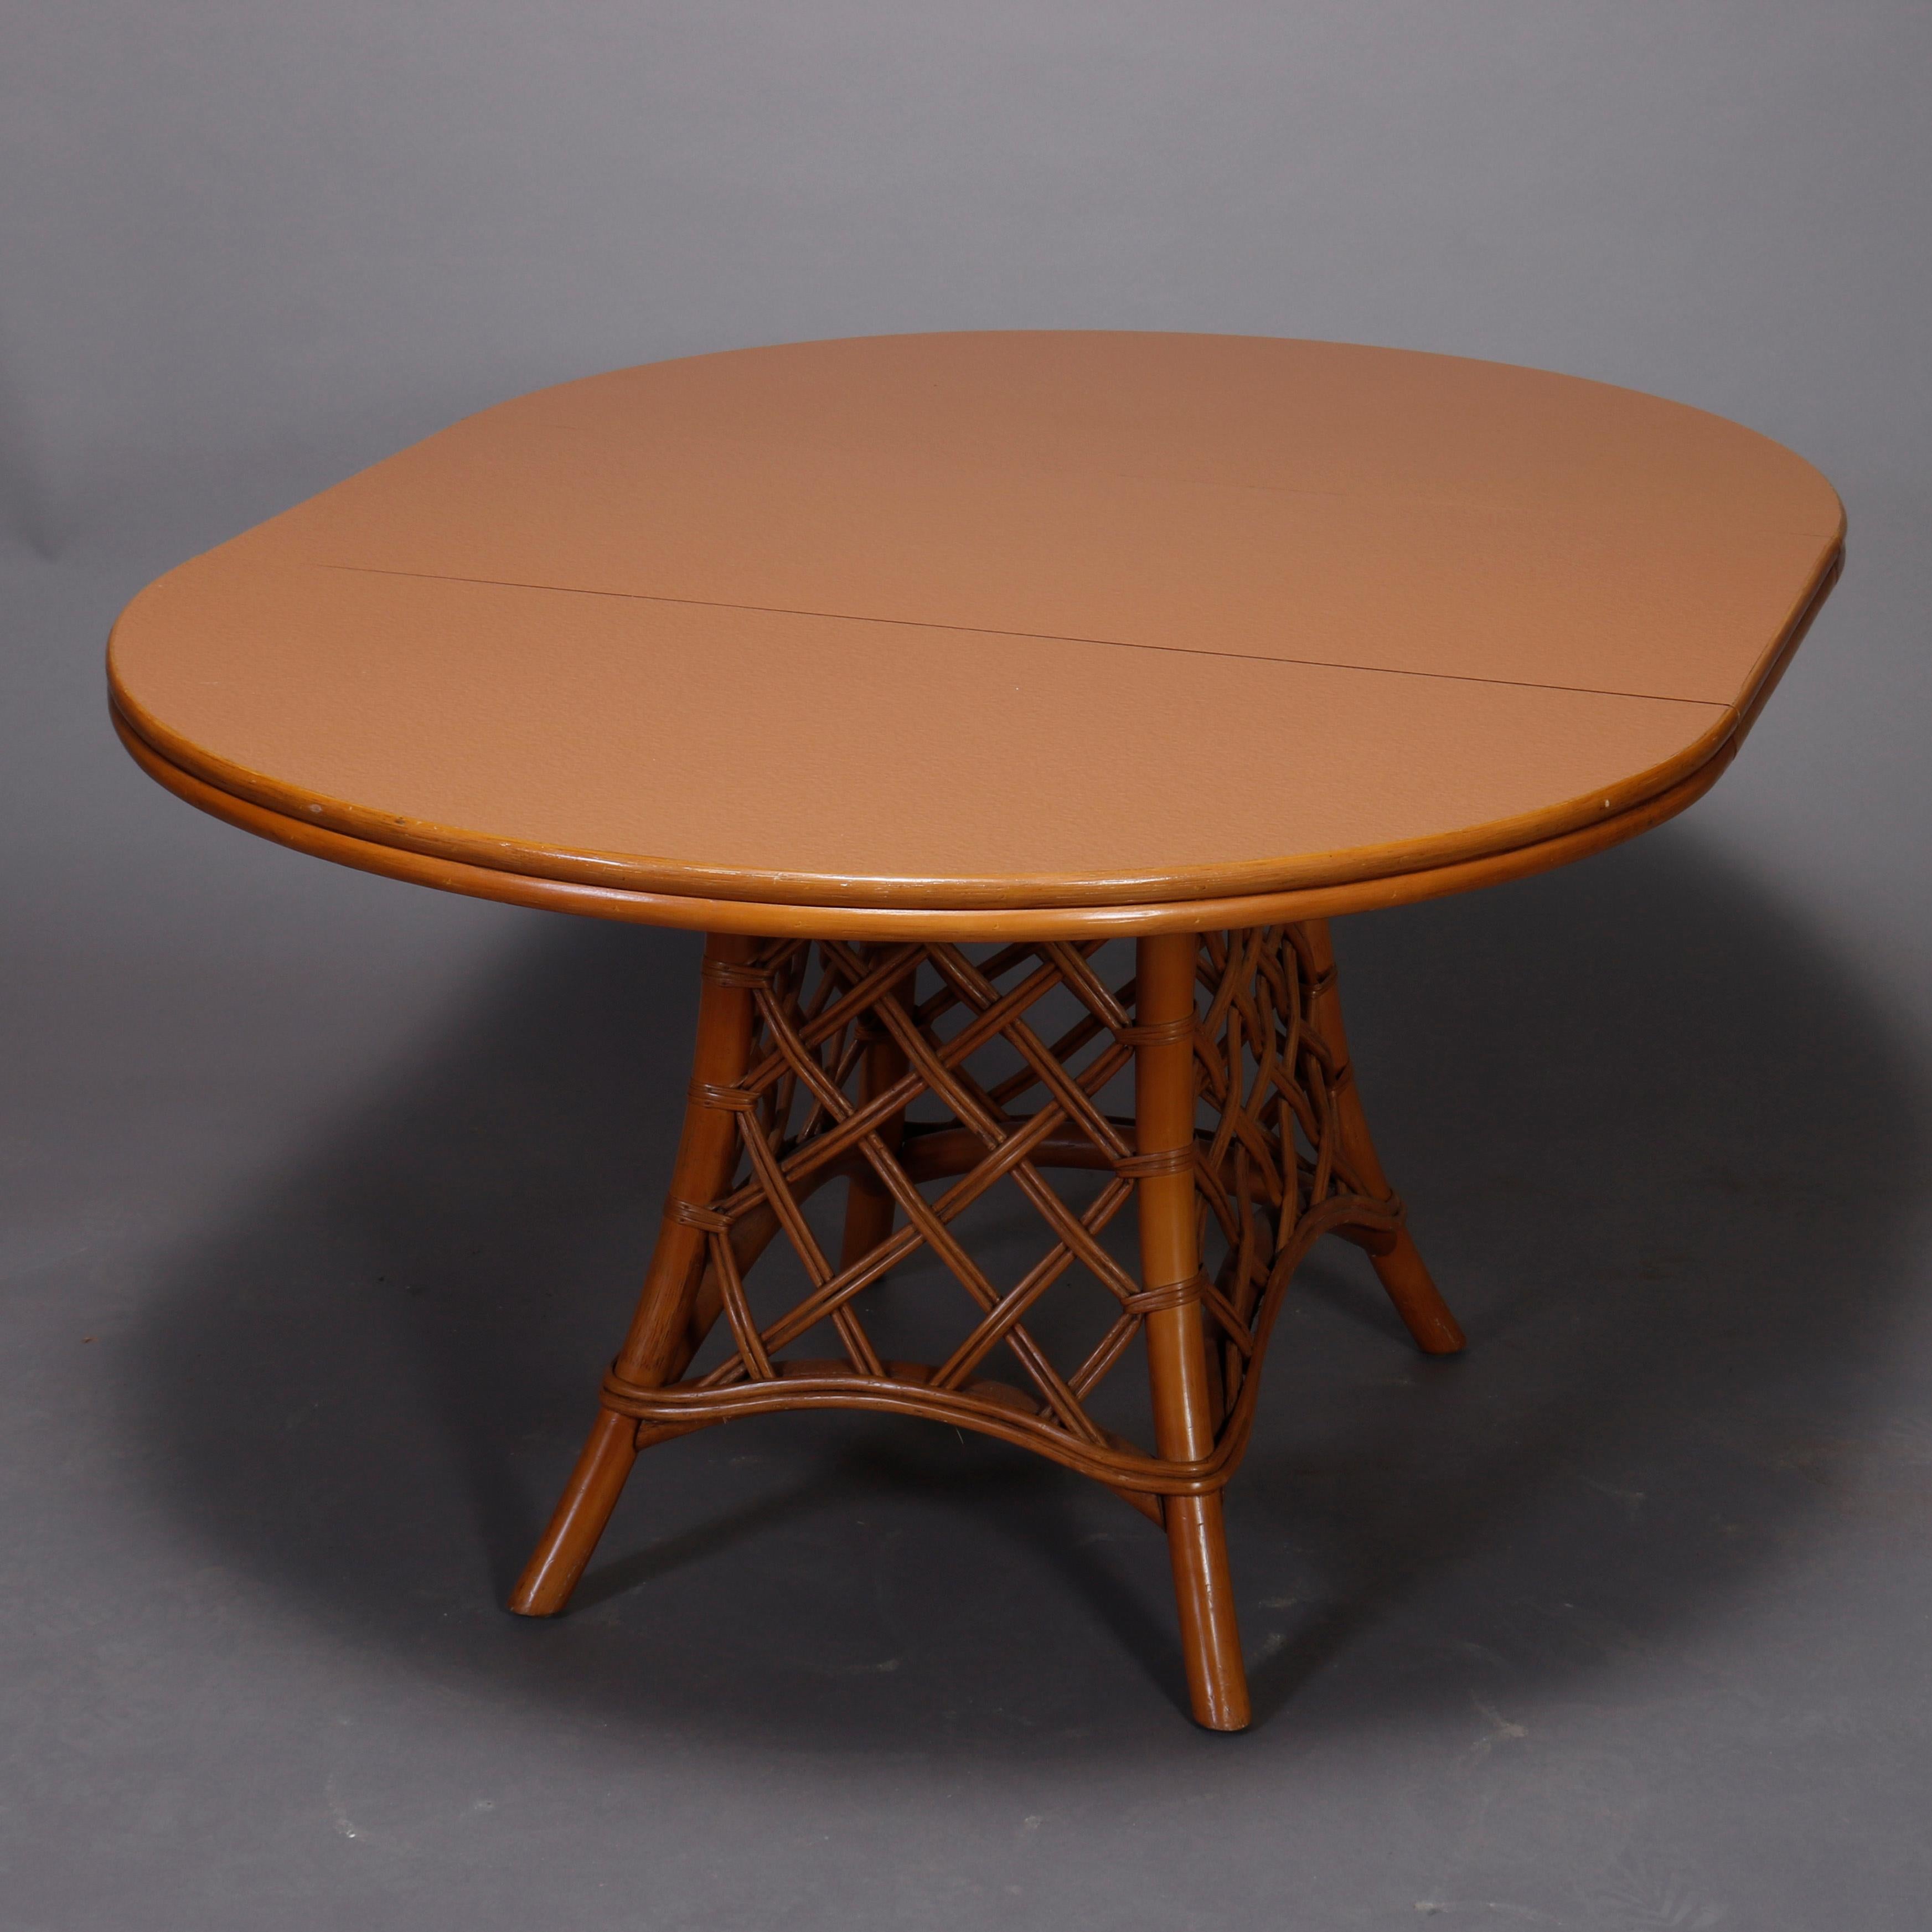 A Mid-Century Modern dining set offers rattan flared lattice pedestal base supporting laminate top having rattan bordering and single leaf, four swivel chairs have upholstered cushions, circa 1970

Measures: 60